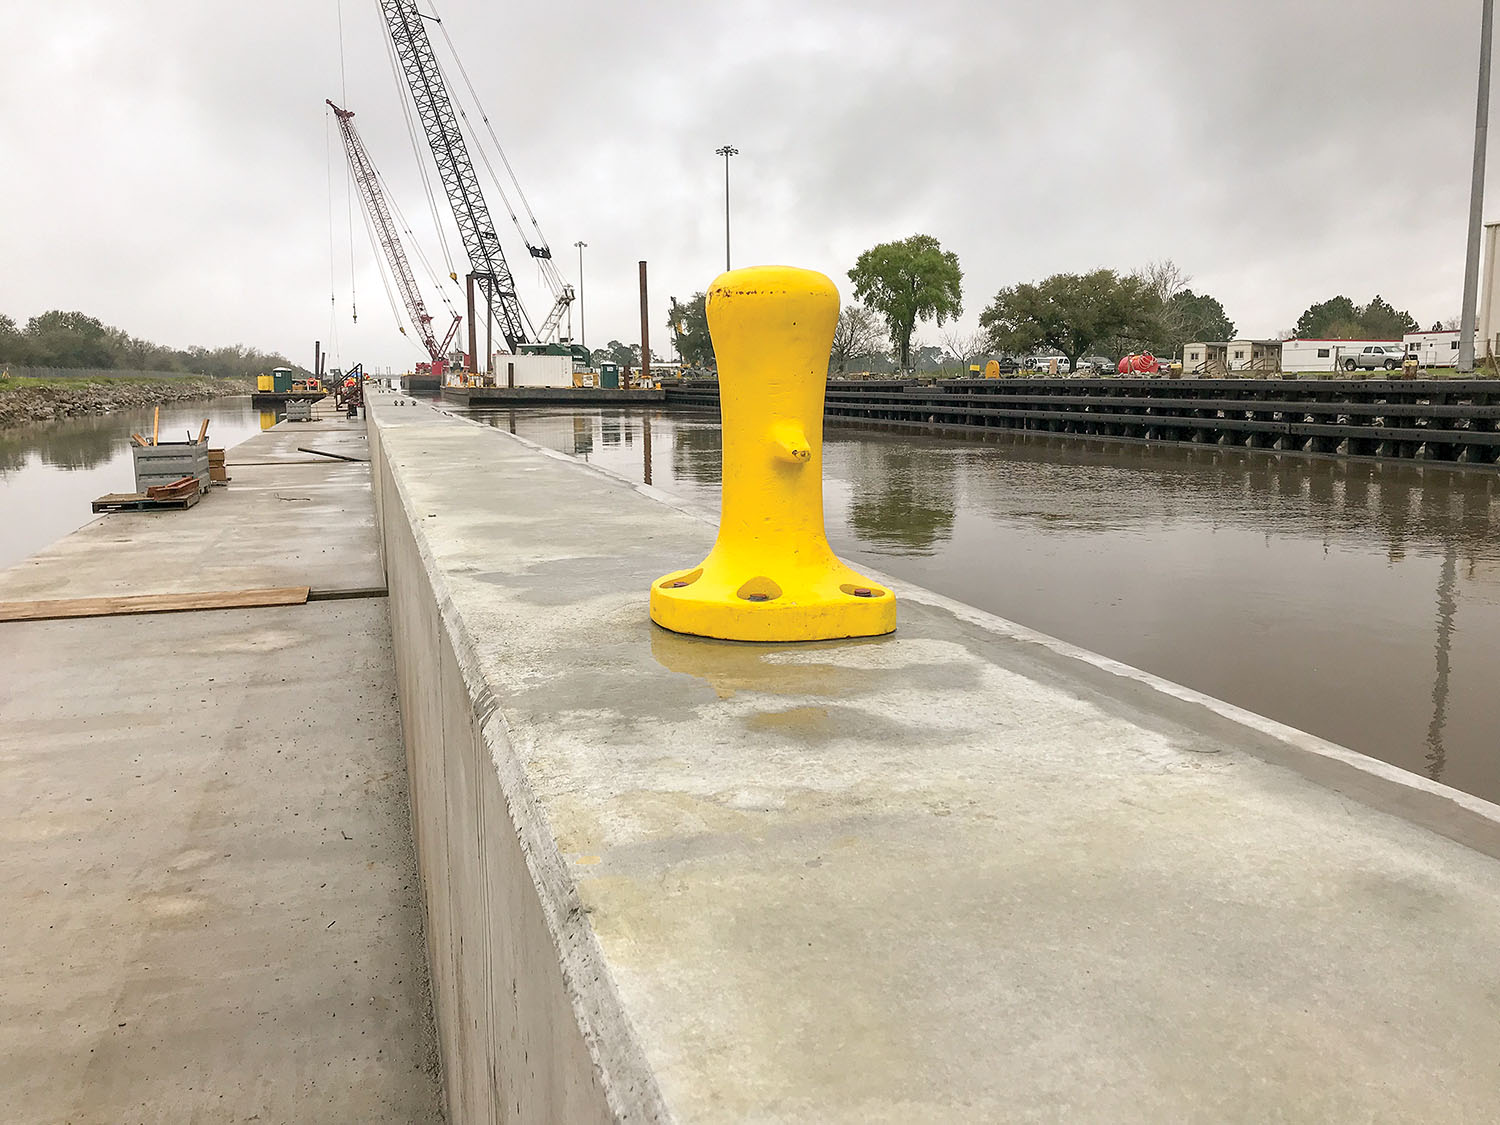 The new guidewall at Calcasieu Lock is nearly complete after more than a year of construction. (Photo courtesy of New Orleans Engineer District)